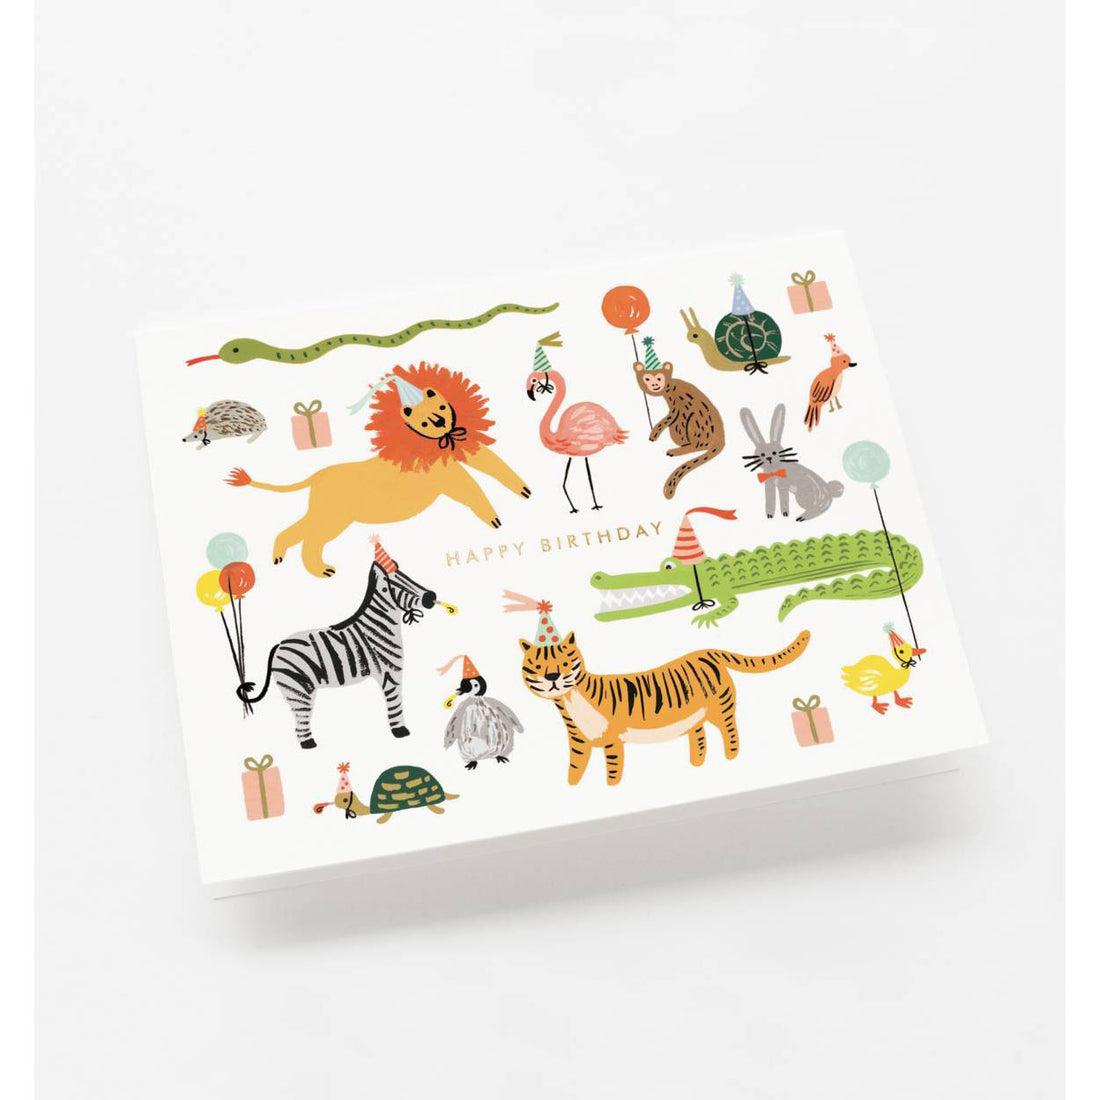 rifle-paper-co-party-animals-birthday-card- (2)